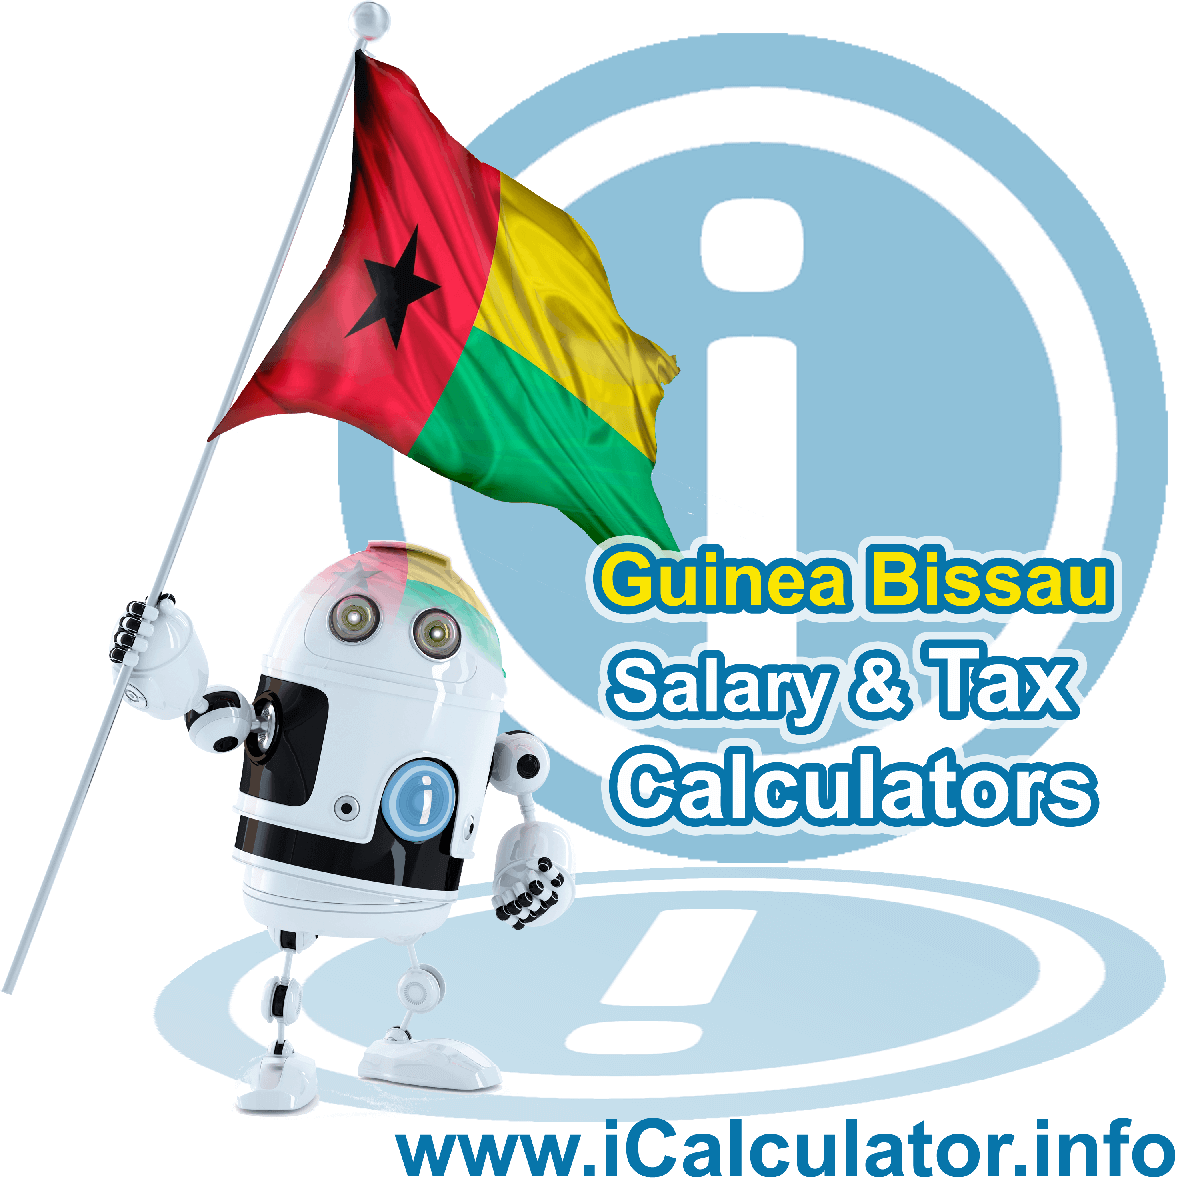 Guinea Bissau Salary Calculator. This image shows the Guinea Bissauese flag and information relating to the tax formula for the Guinea Bissau Tax Calculator